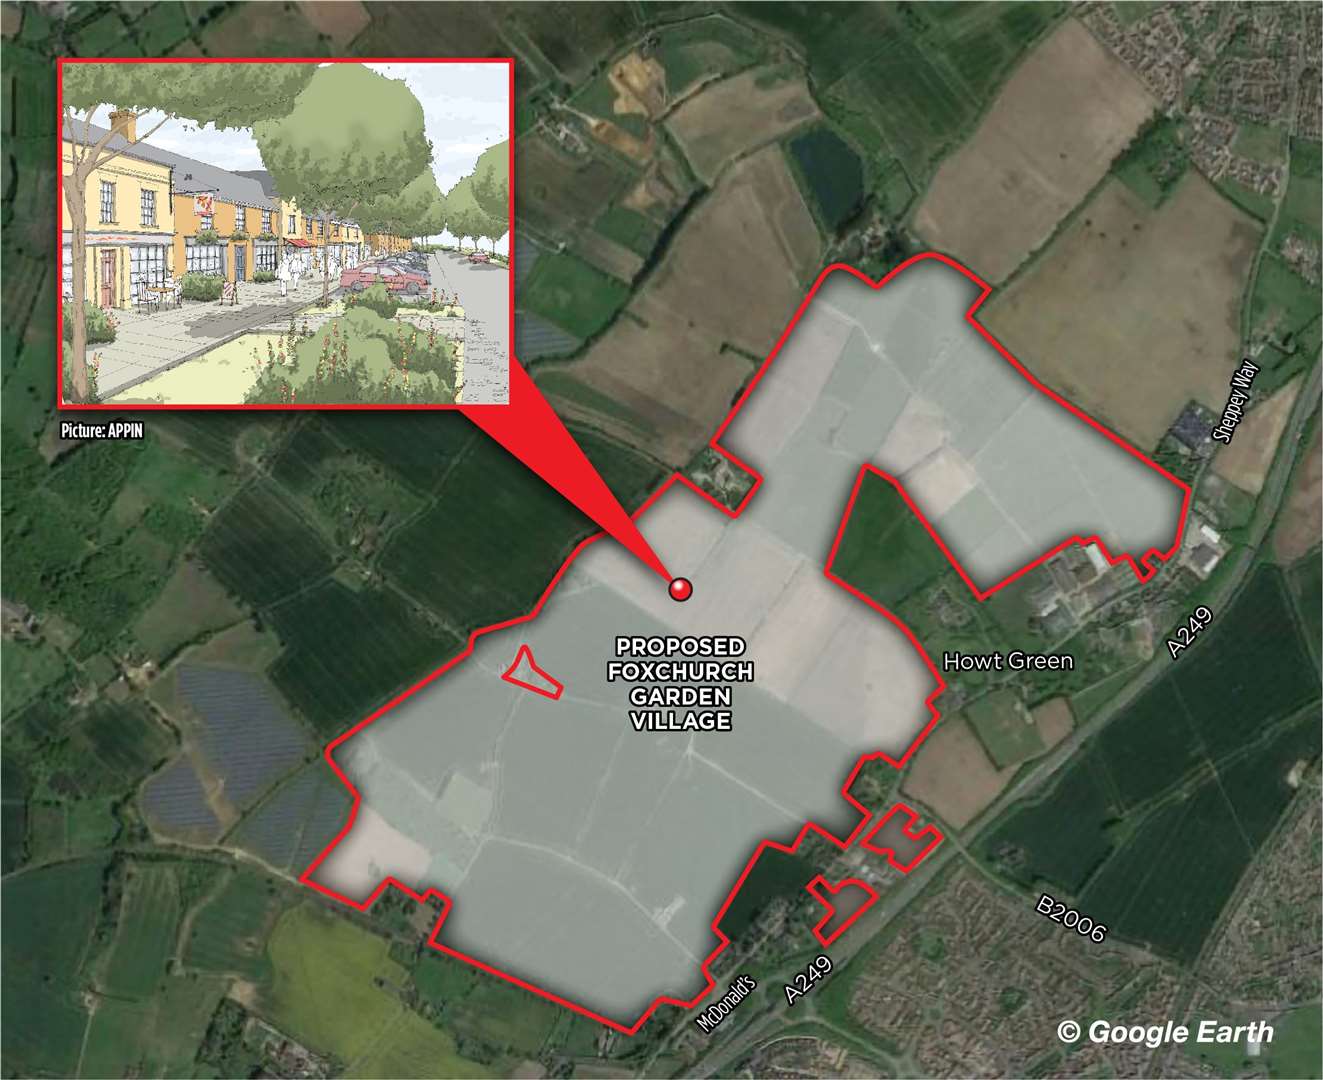 An application for the Foxchurch Garden Village near Bobbing has now been submitted to Swale Borough Council